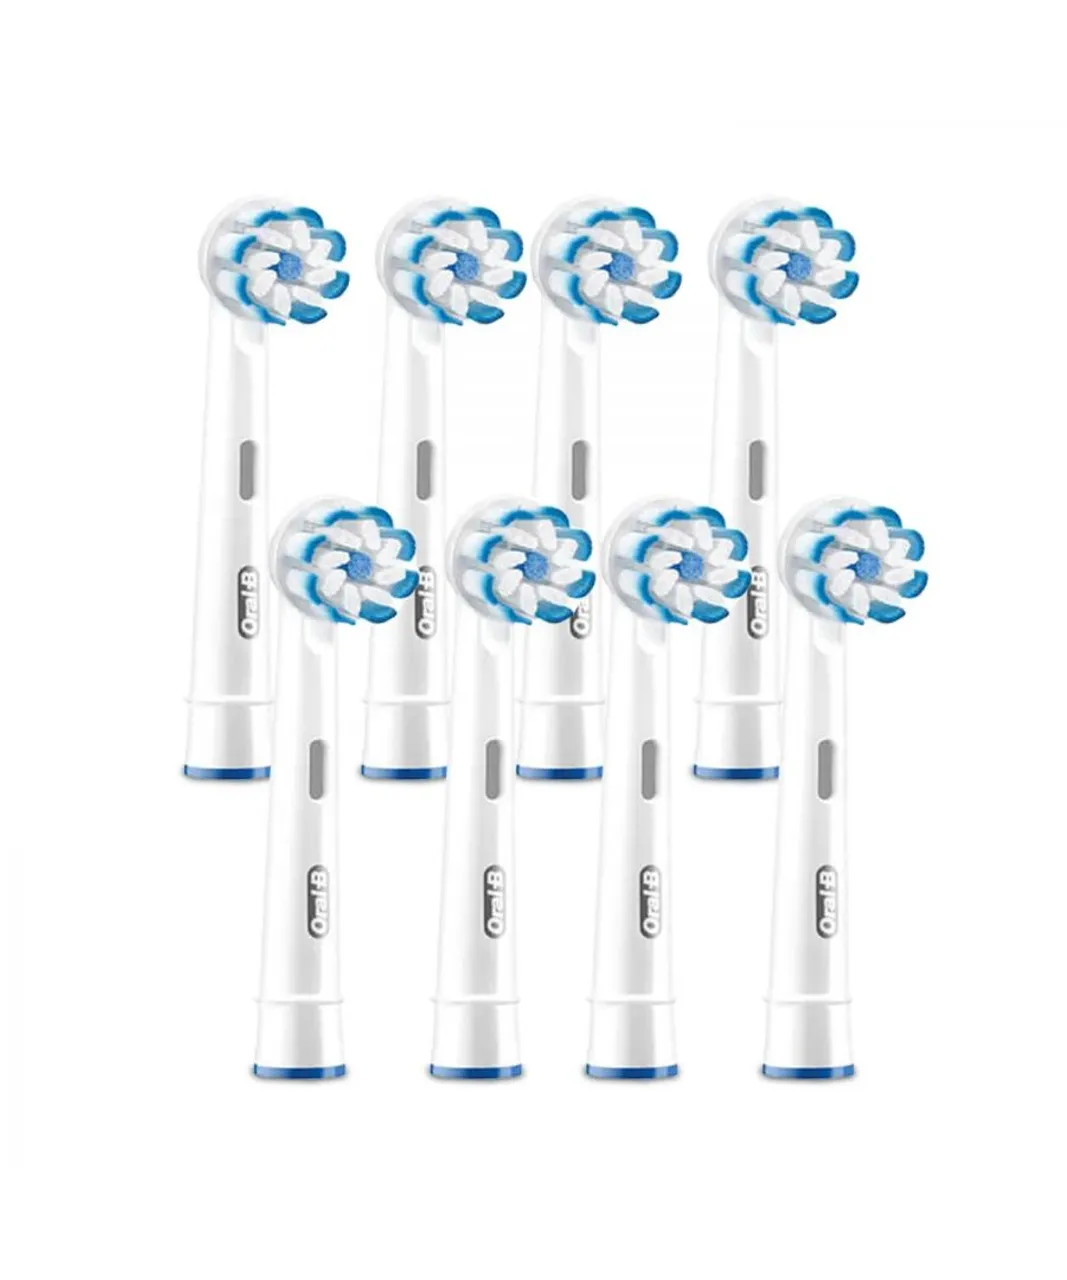 Oral B Unisex Oral-B Sensi Clean Power Toothbrush Refill Heads, Pack of 8 - NA - One Size